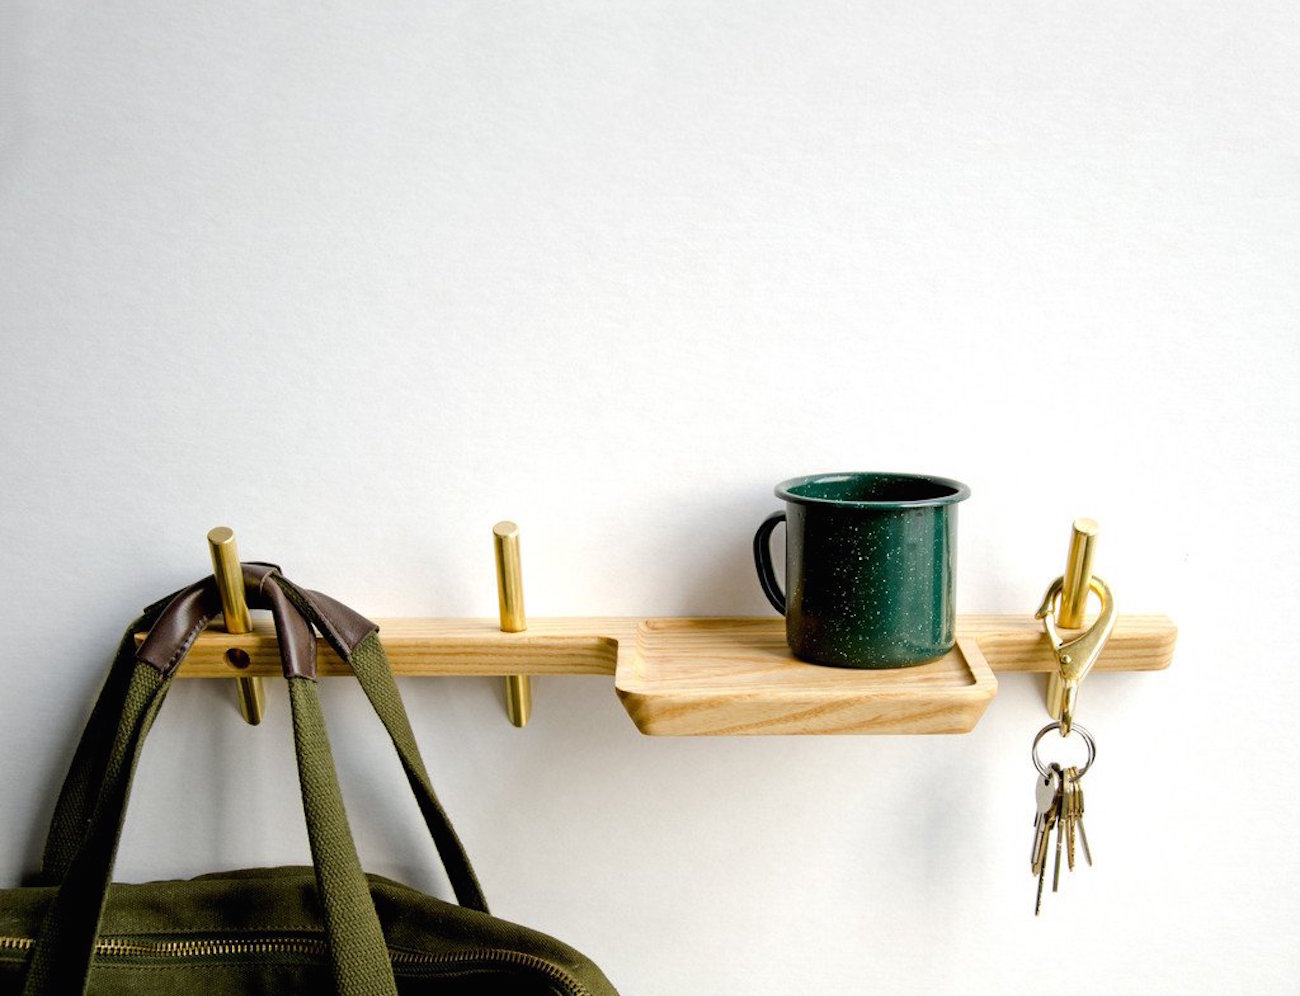 Intersect Valet – A Series of Wall Hooks and Wall Shelf